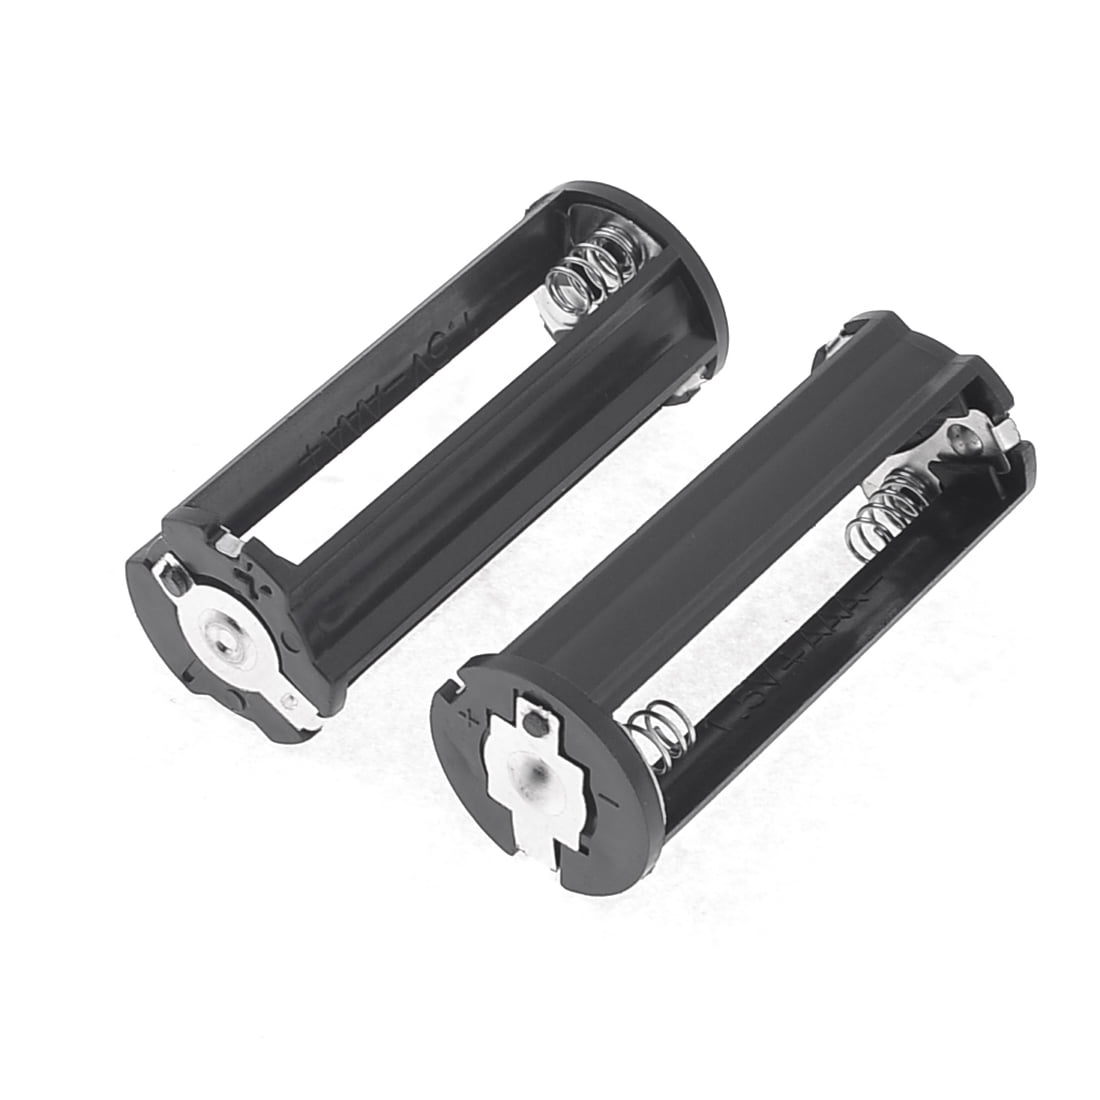 2 Pieces 3XAAA Cylinder Battery Holder for 3 x 1.5V AAA Batteries Flashlight Torch